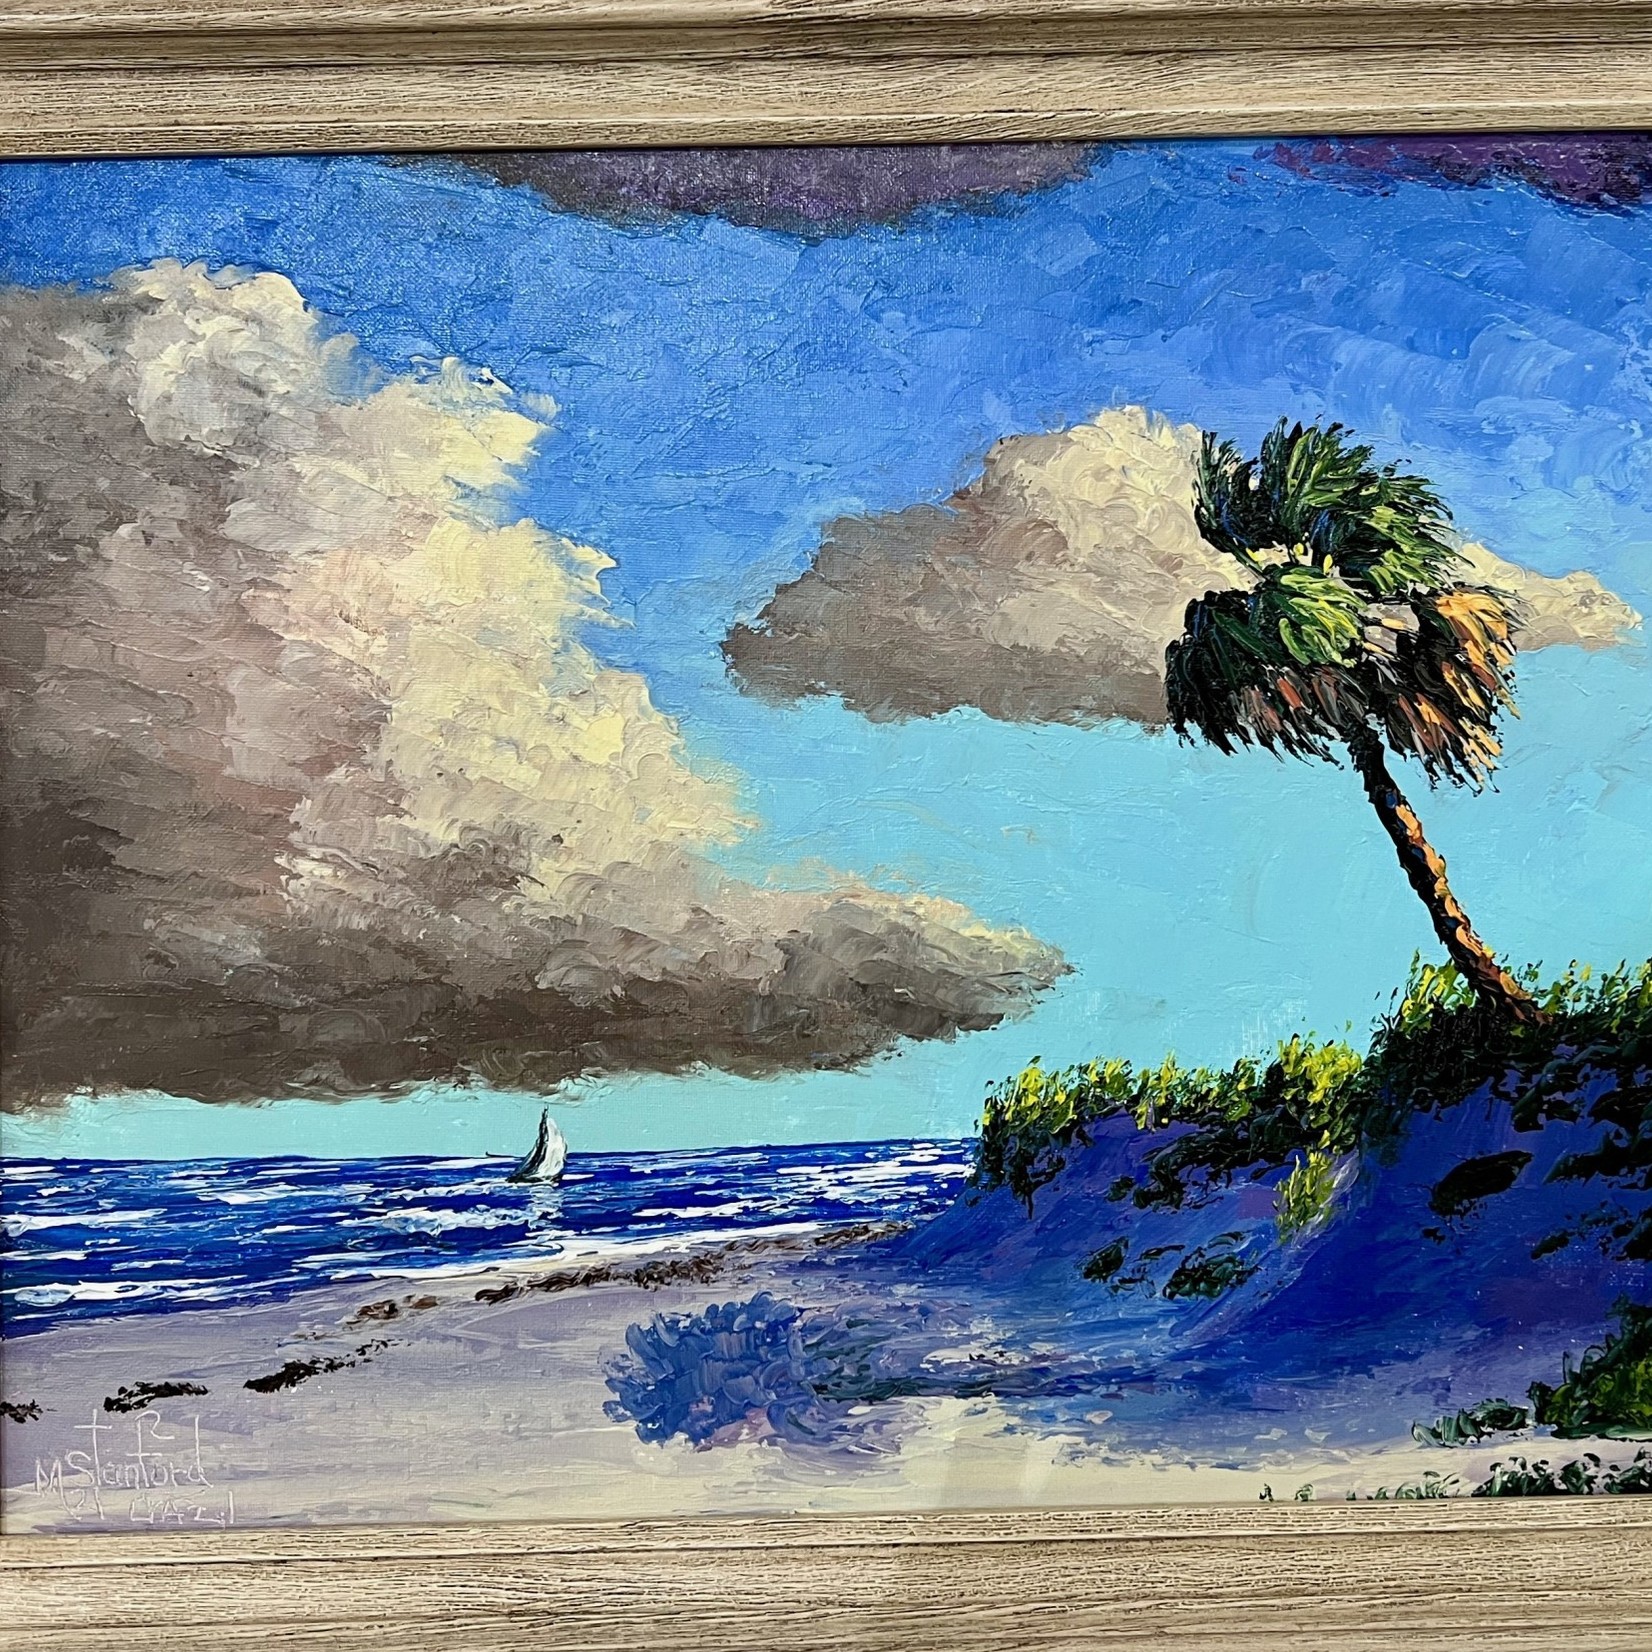 AE Backus, Highwaymen (Original/2nd Generation/Legacy), Indian River School Double Dune Rio Mar by Mark Stanford, oil on canvas framed, 16x20", RARE